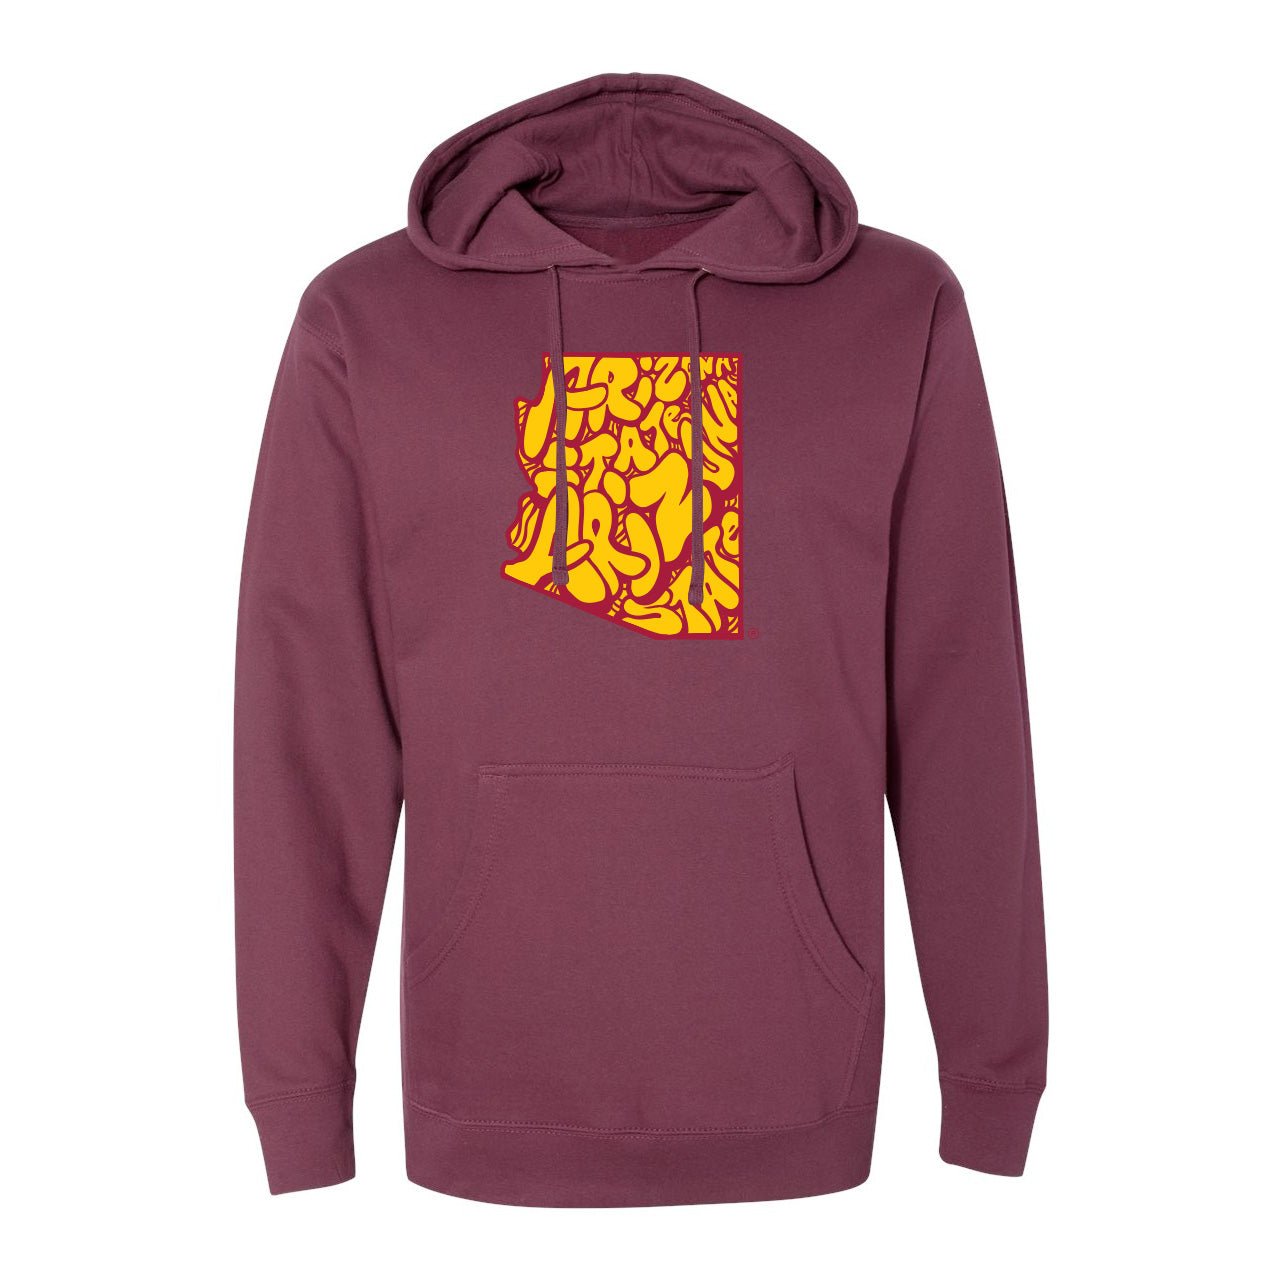 ASU Bubble State Hoodie - WYR